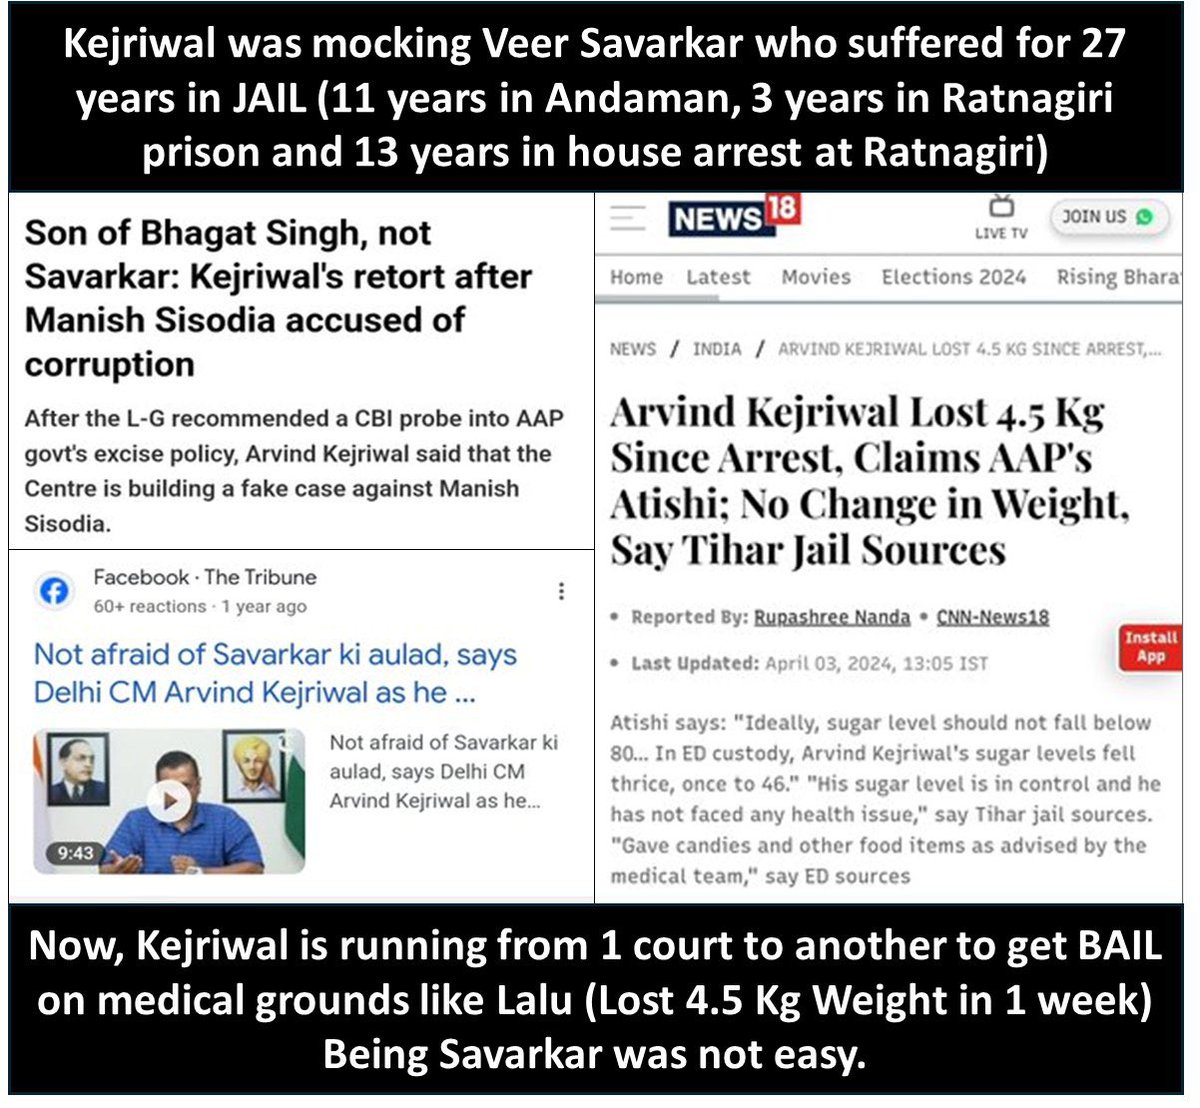 GhungrooSeth was mocking Veer Savarkar who was tortured in Andaman for 14 years and spent 30 year in jail 
Today he is already crying that he lost 4.5 kg weight and his sugar increased after 10 days in jail